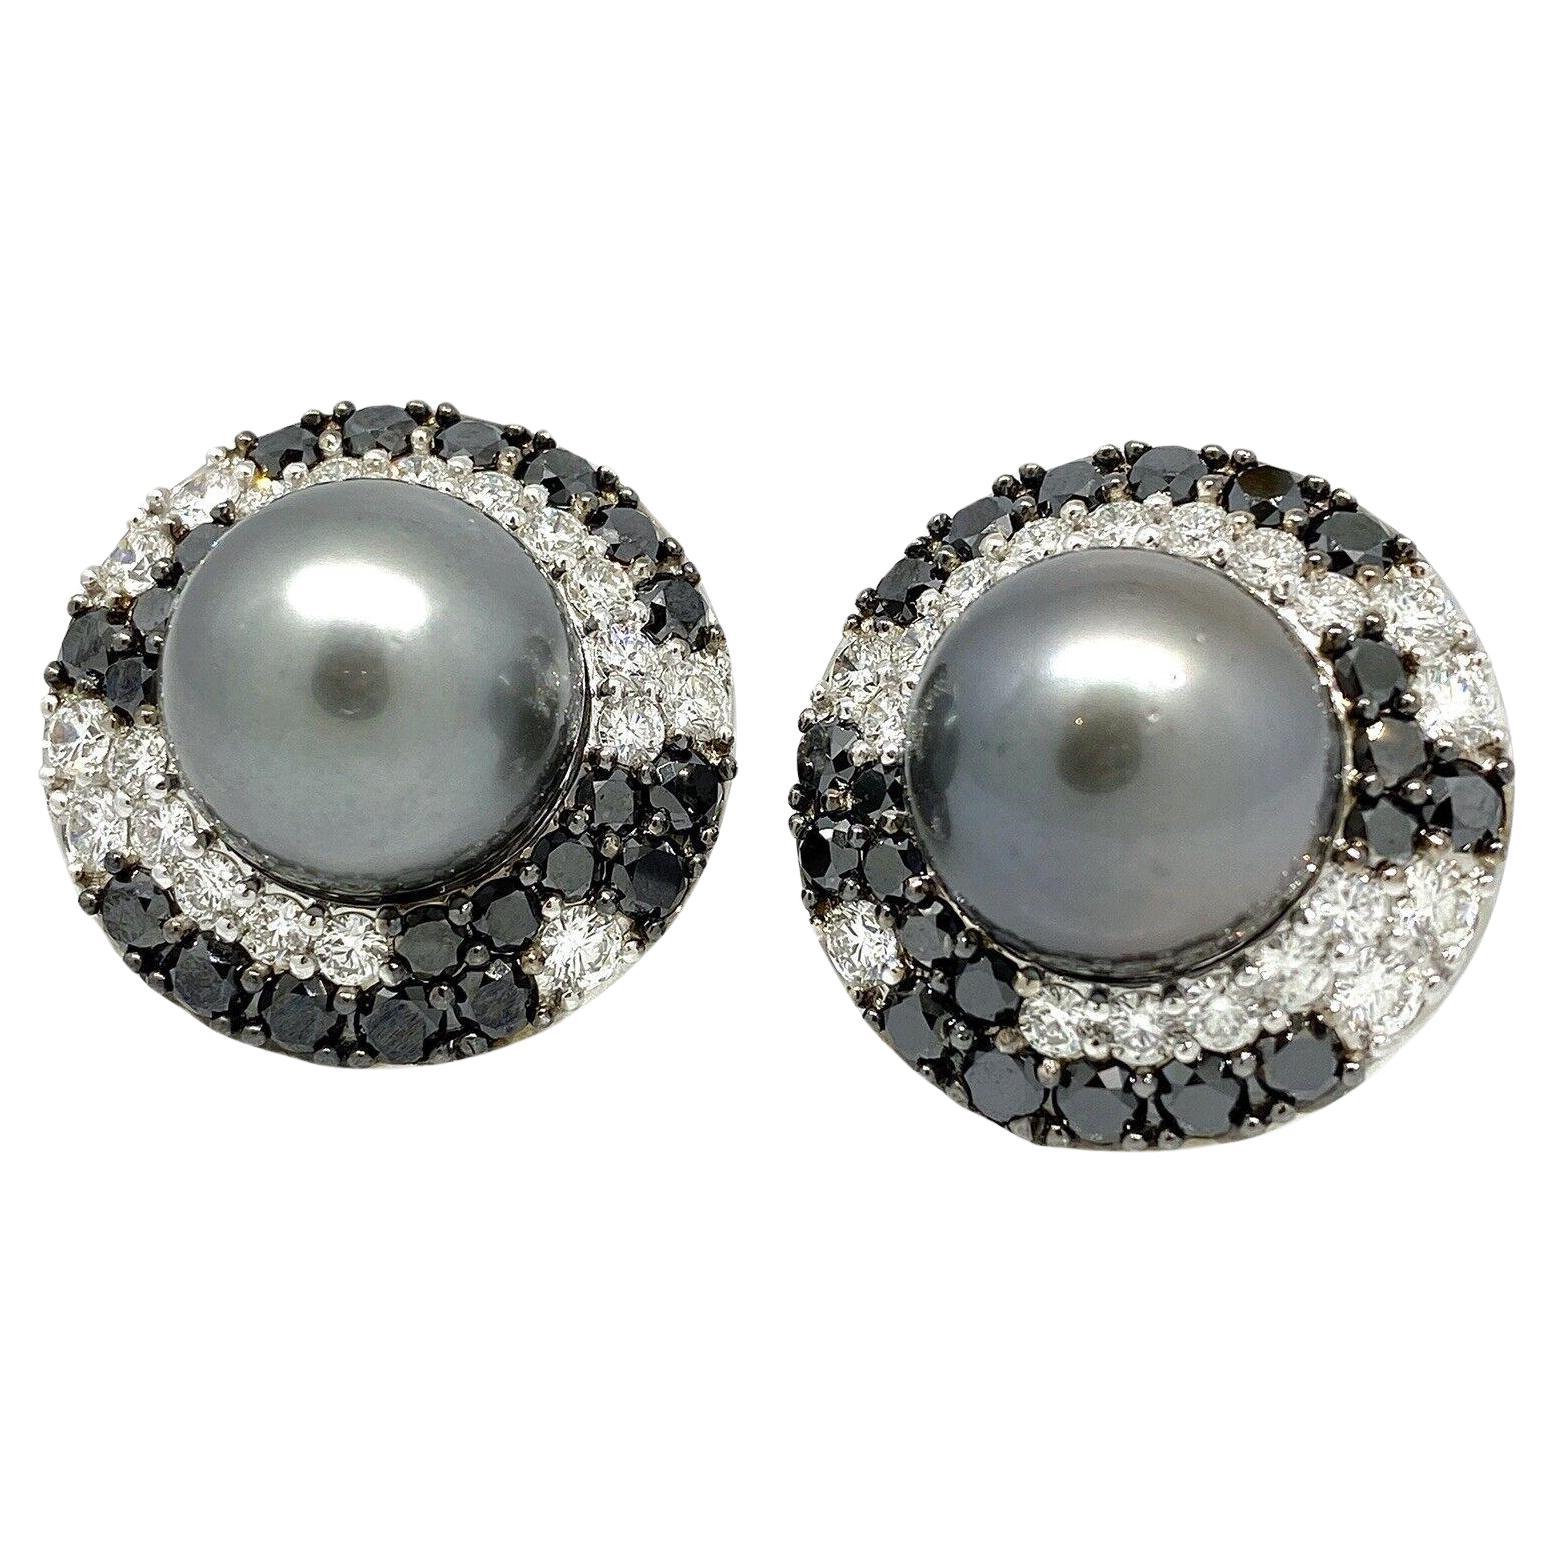 Tahitian Black Pearl Earrings with Black and White Diamonds in 18k White Gold